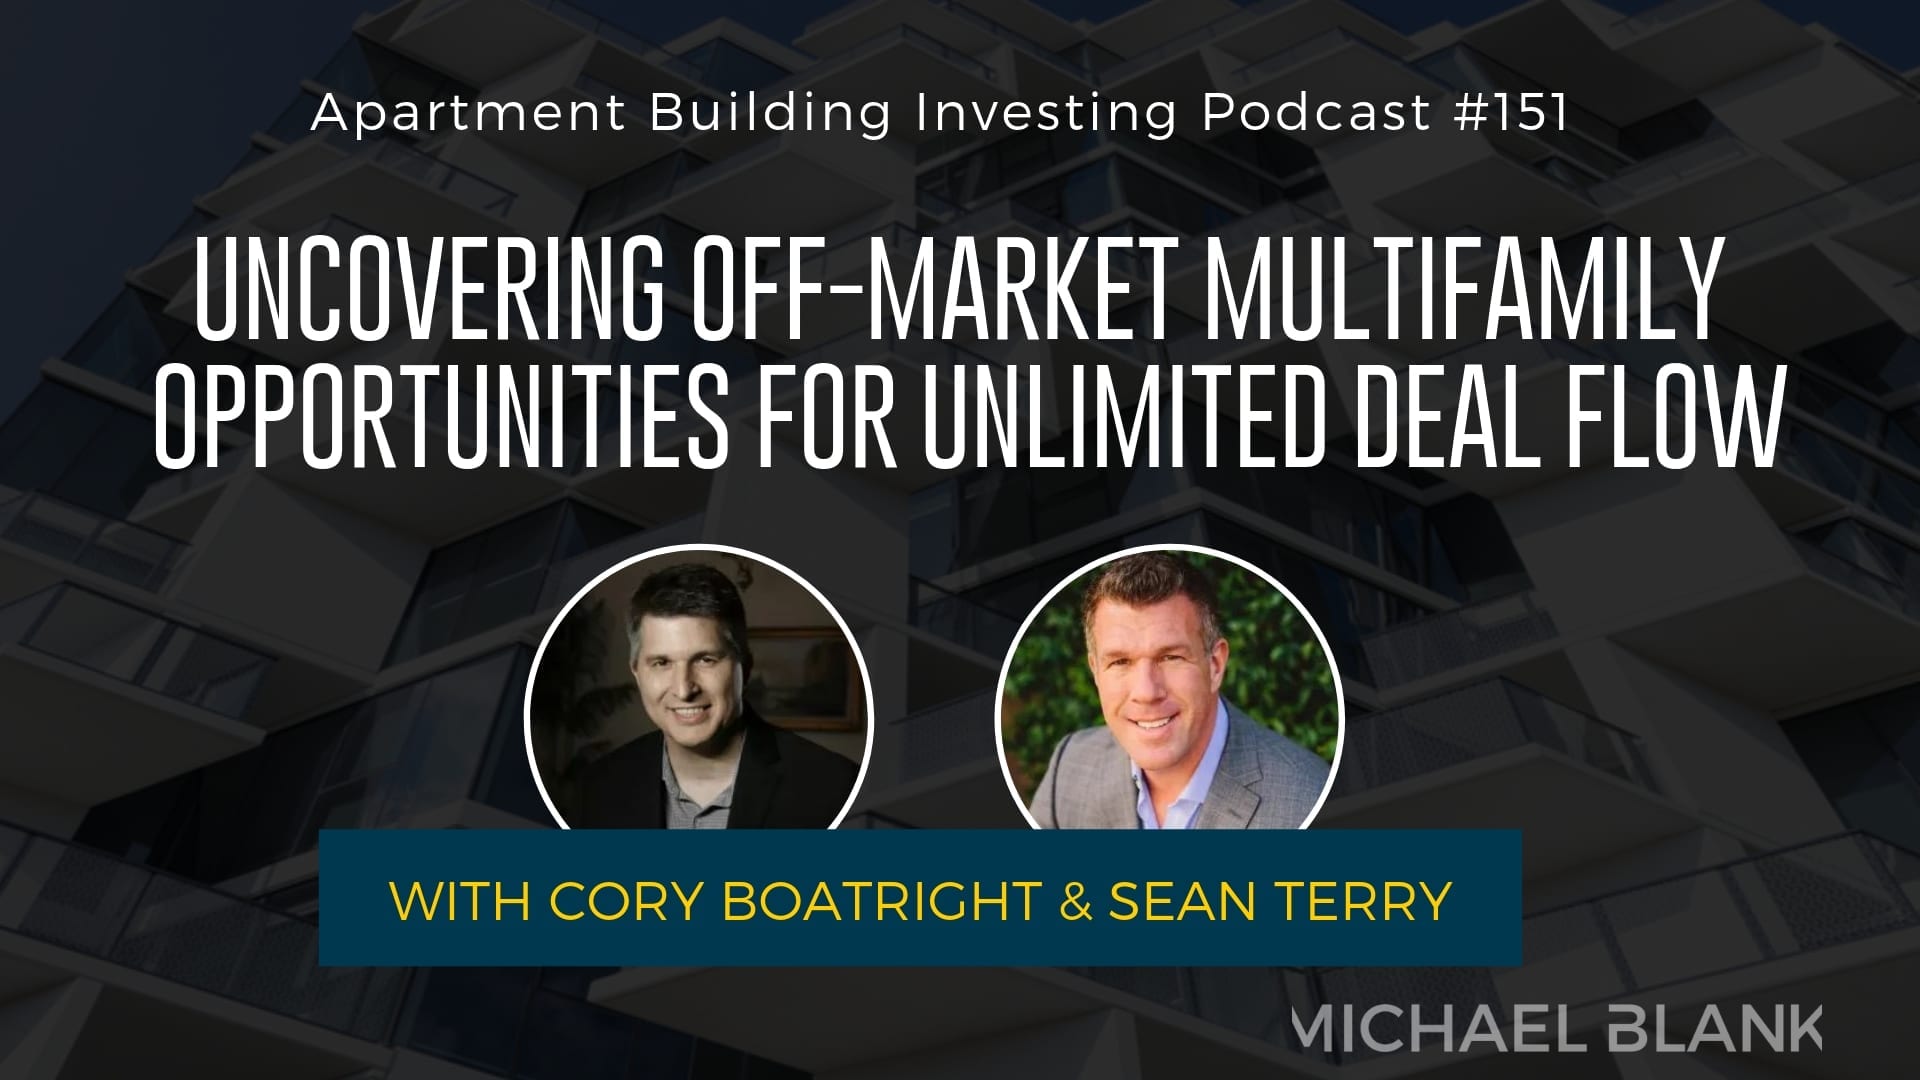 MB 151: Uncovering Off-Market Multifamily Opportunities for Unlimited Deal Flow – With Cory Boatright & Sean Terry